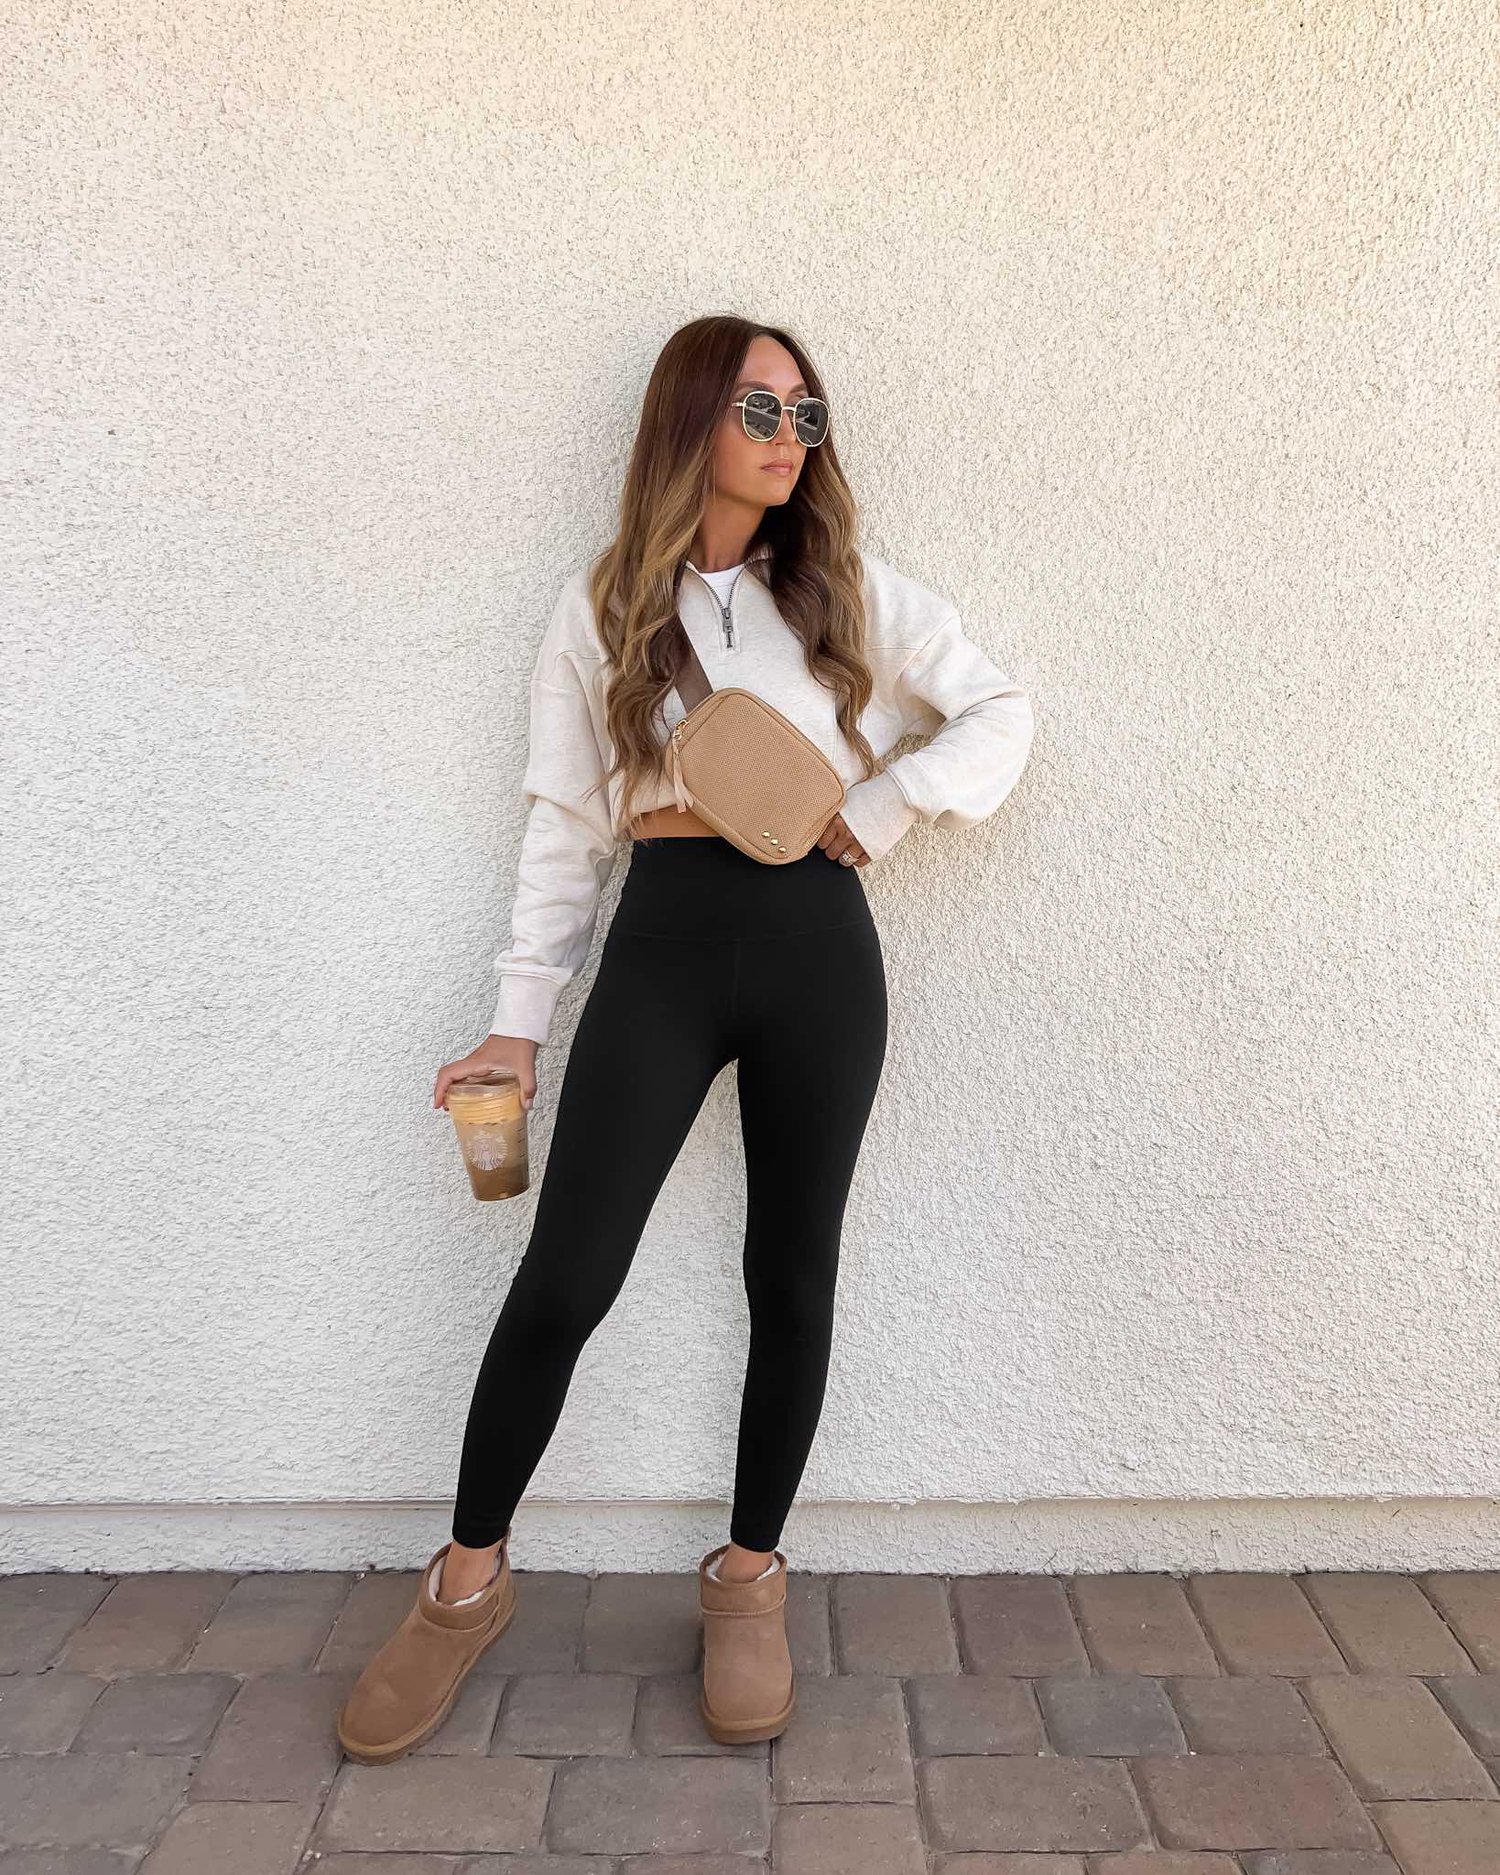 Black Leggings with Uggs Outfits (9 ideas & outfits)